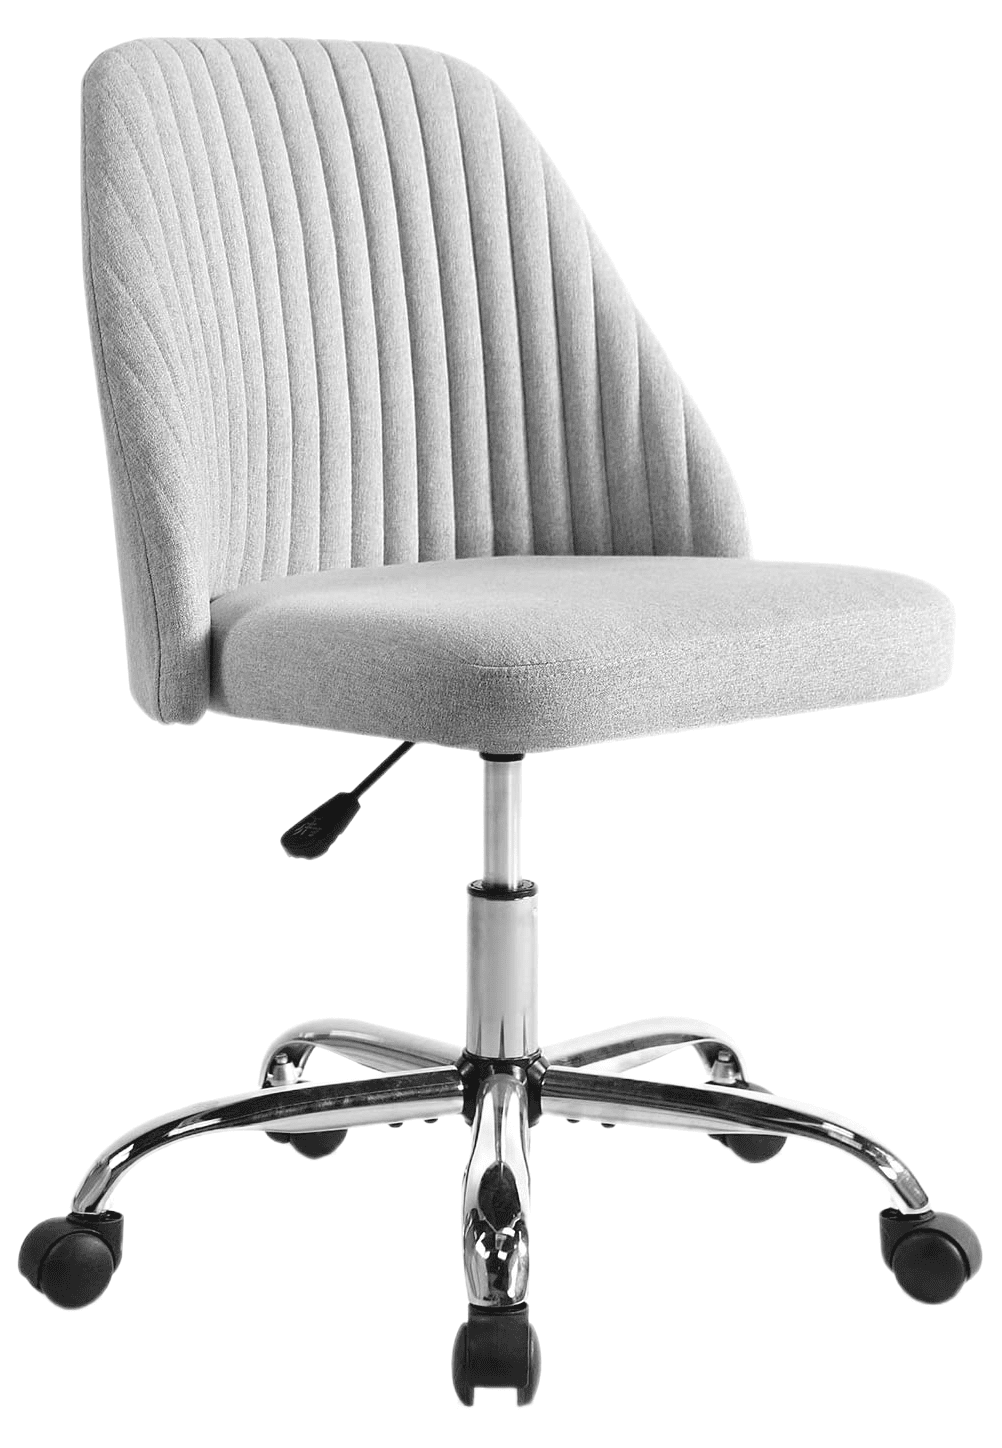 Orthopedic office chair to support your - Neilan Furniture